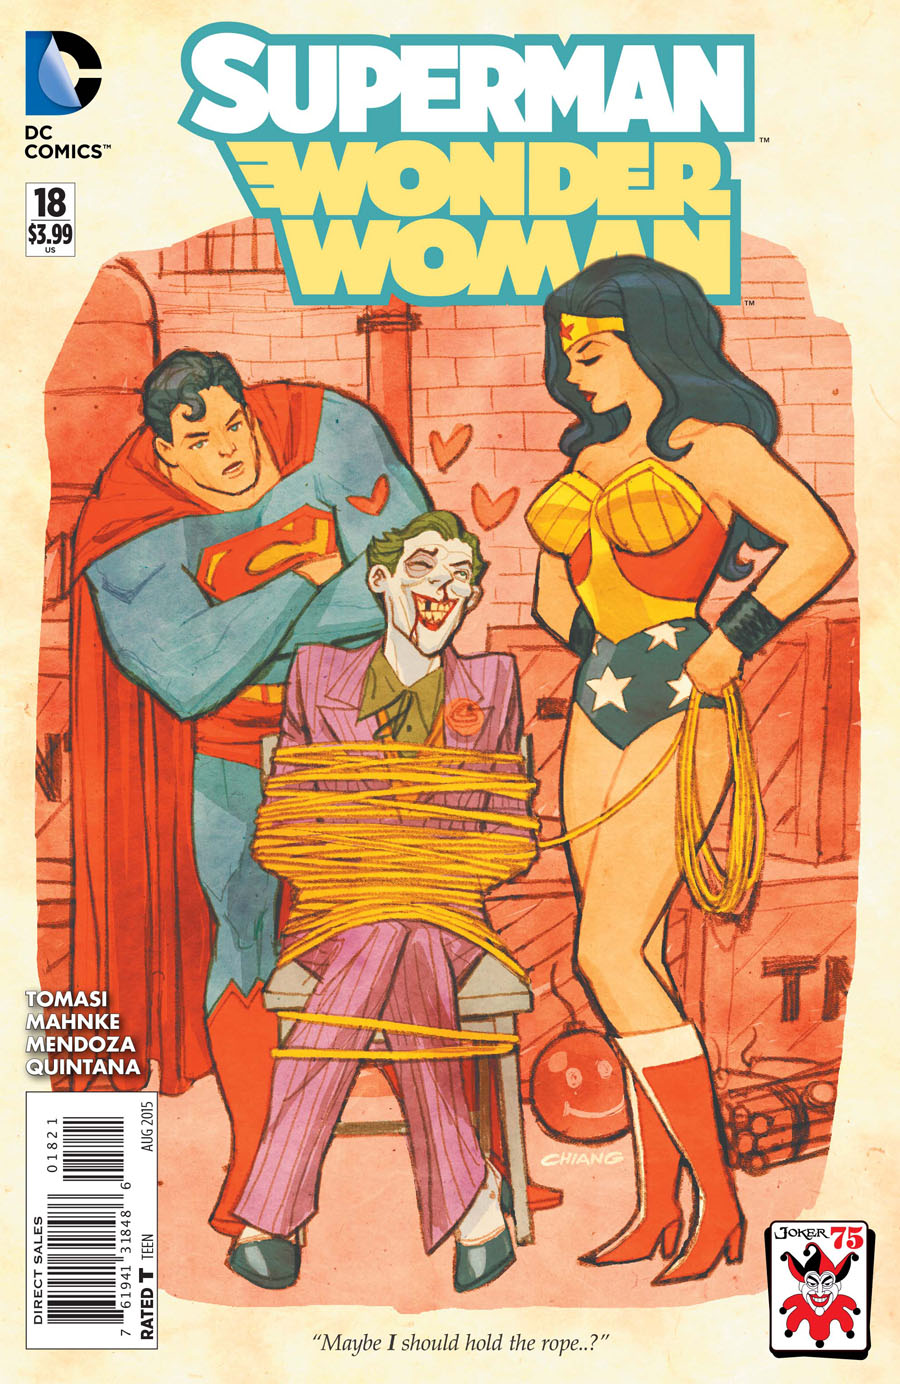 Superman Wonder Woman #18 Cover B Variant Cliff Chiang The Joker 75th Anniversary Cover